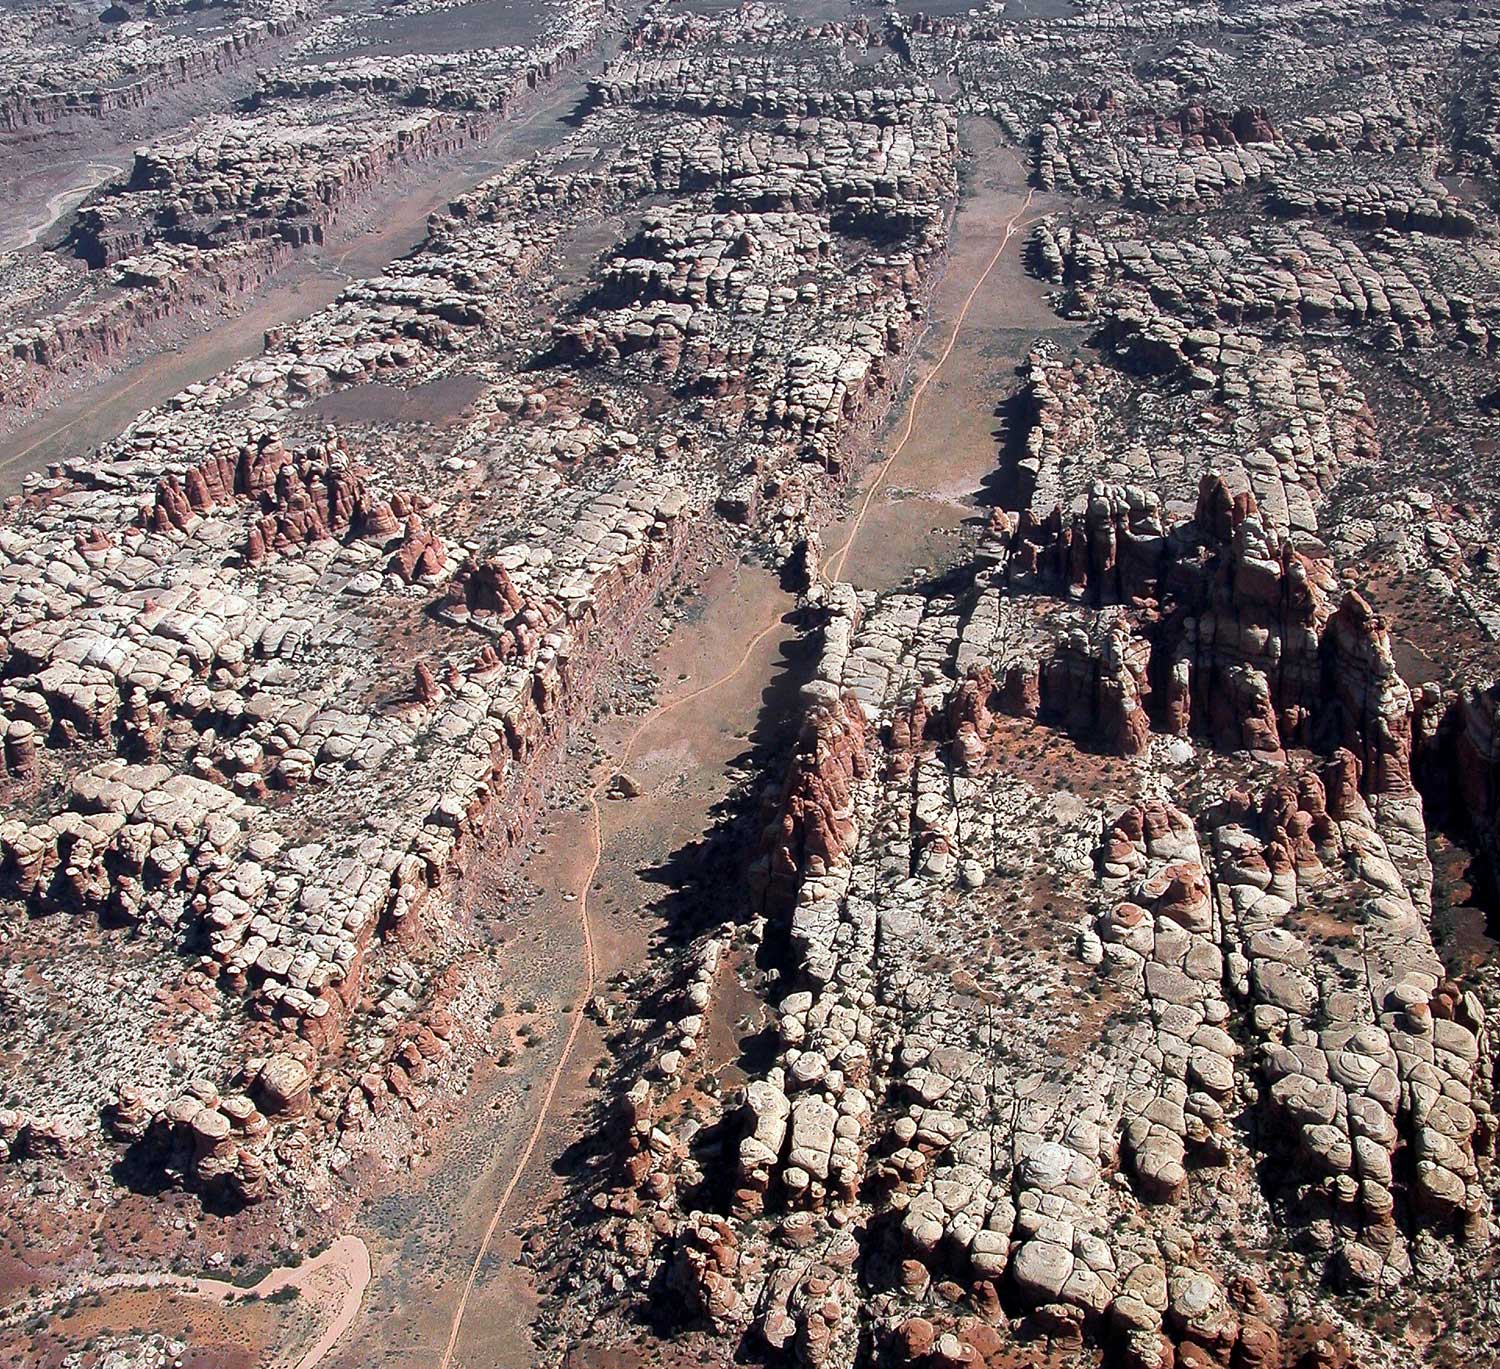 Photograph of grabens in the Canyonlands National Park, Utah. The grabens are long, narrow valleys between flat, raised areas of heavily weathered and possibly jointed red rock.